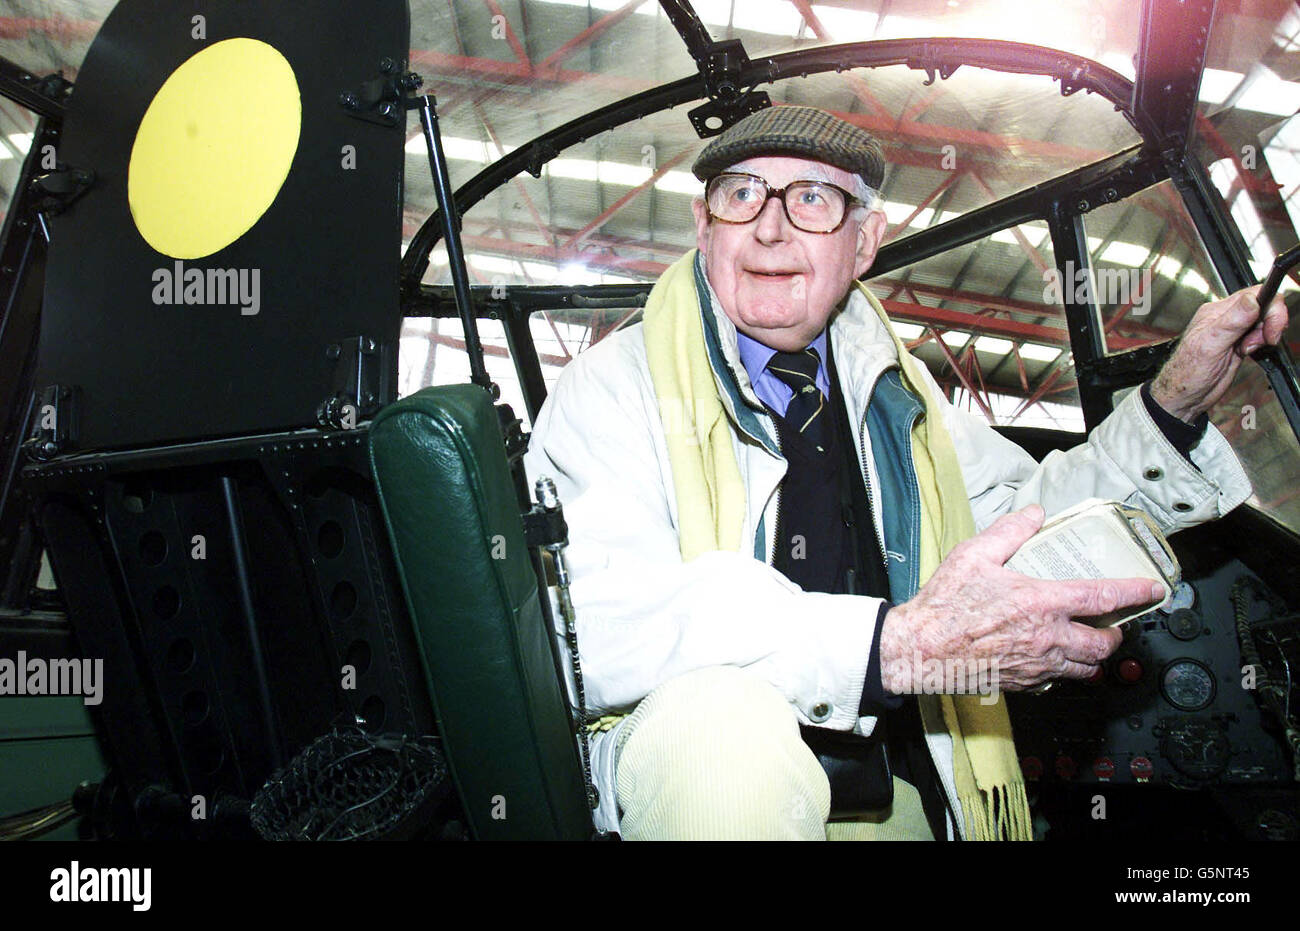 Peter George, 1st Officer with the Air Transport Auxiliary, sits in the cockpit of a Lancaster Bomber during celebrations to mark the 60th anniversary of the plane's 2nd World War missions, at Duxford Air Museum, Cambridgeshire. * RAF veterans criticised the Ministry of Defence's failure to recognise the achievements of Bomber Command, feeling that campaign medals should have been awarded to the crews despite the controversy caused by the number of civilians killed during the bombing raids over Germany, which are seen as a vital contribution to the Allied victory. Stock Photo